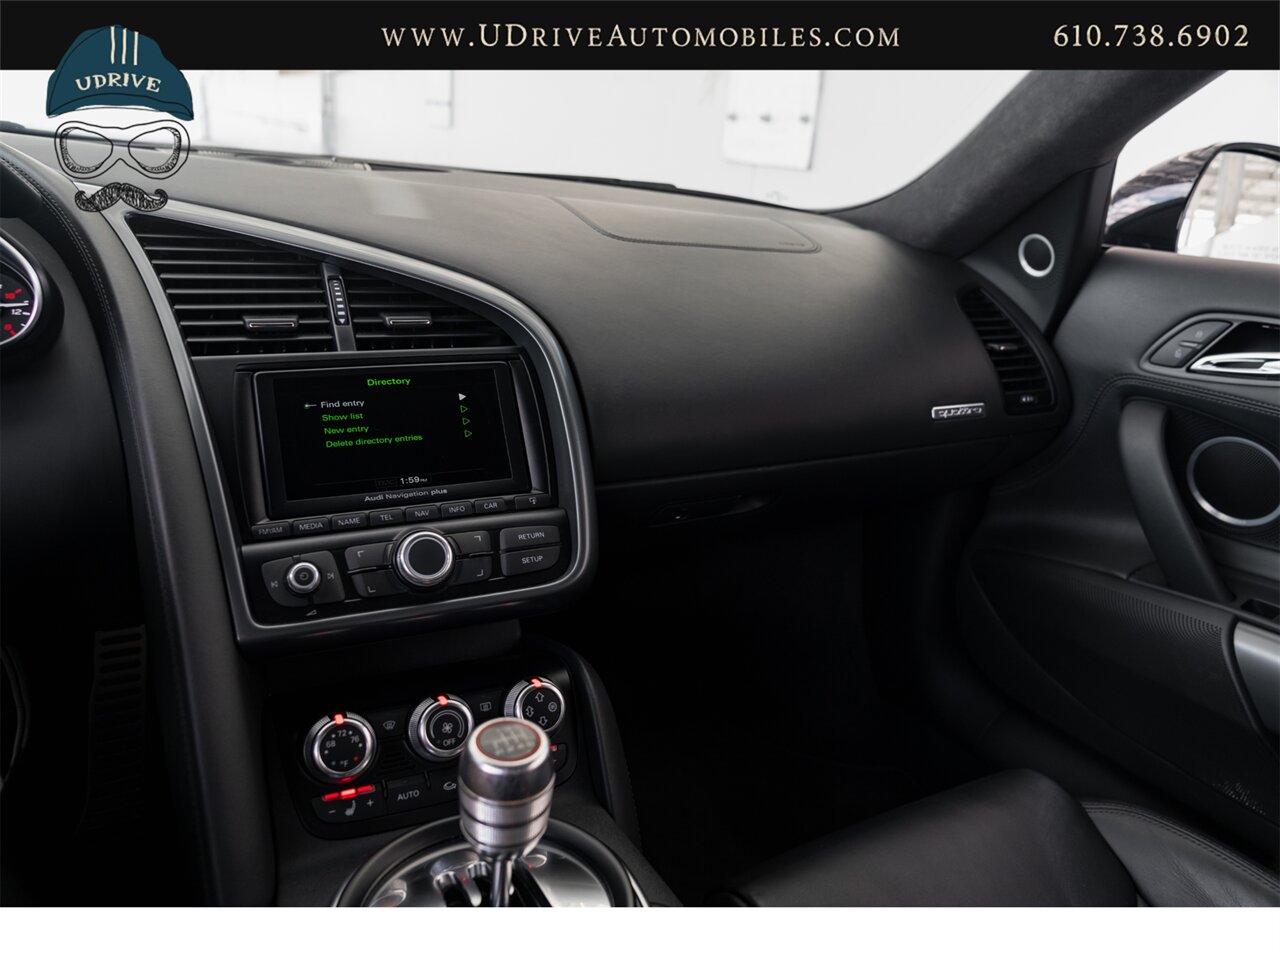 2011 Audi R8 5.2 Quattro  V10 6 Speed Manual - Photo 36 - West Chester, PA 19382